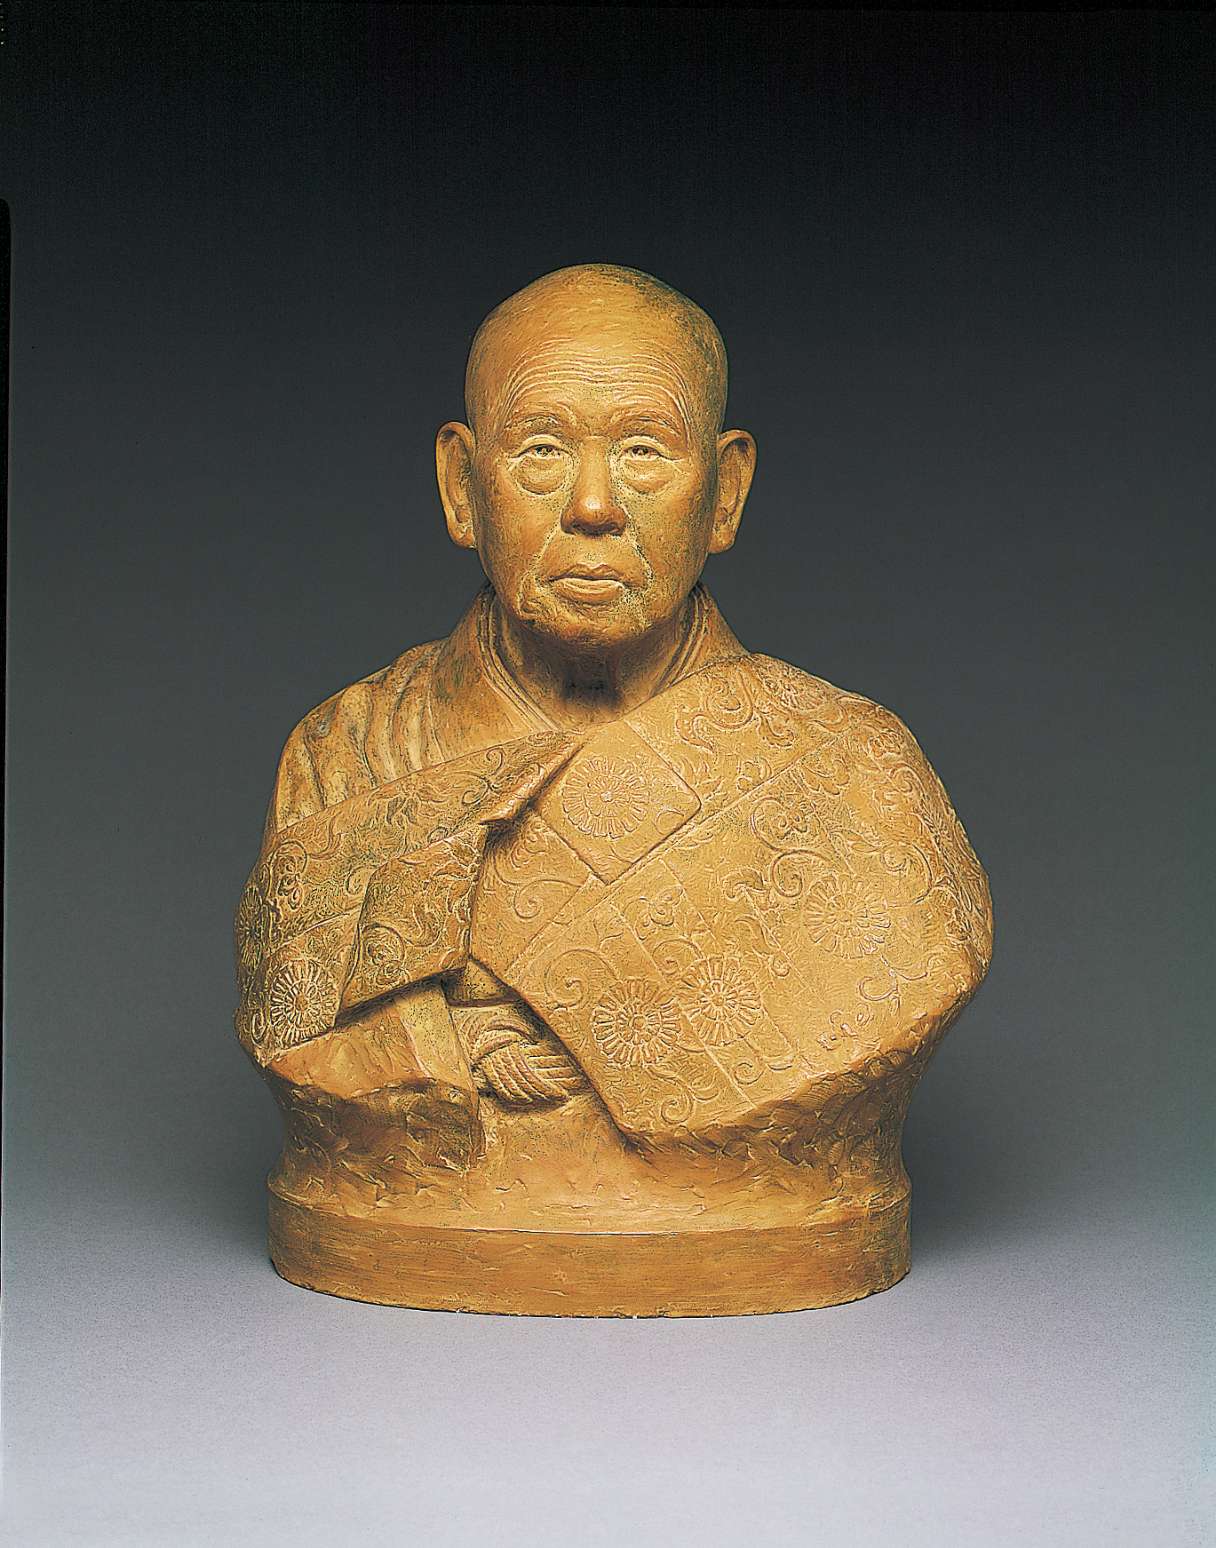 An ochre hued bust of a shaven headed, elderly Japanese man, with kind eyes and large ears, his face wrinkled with age, wearing a kimono over which is draped an ornately decorated patched robe.